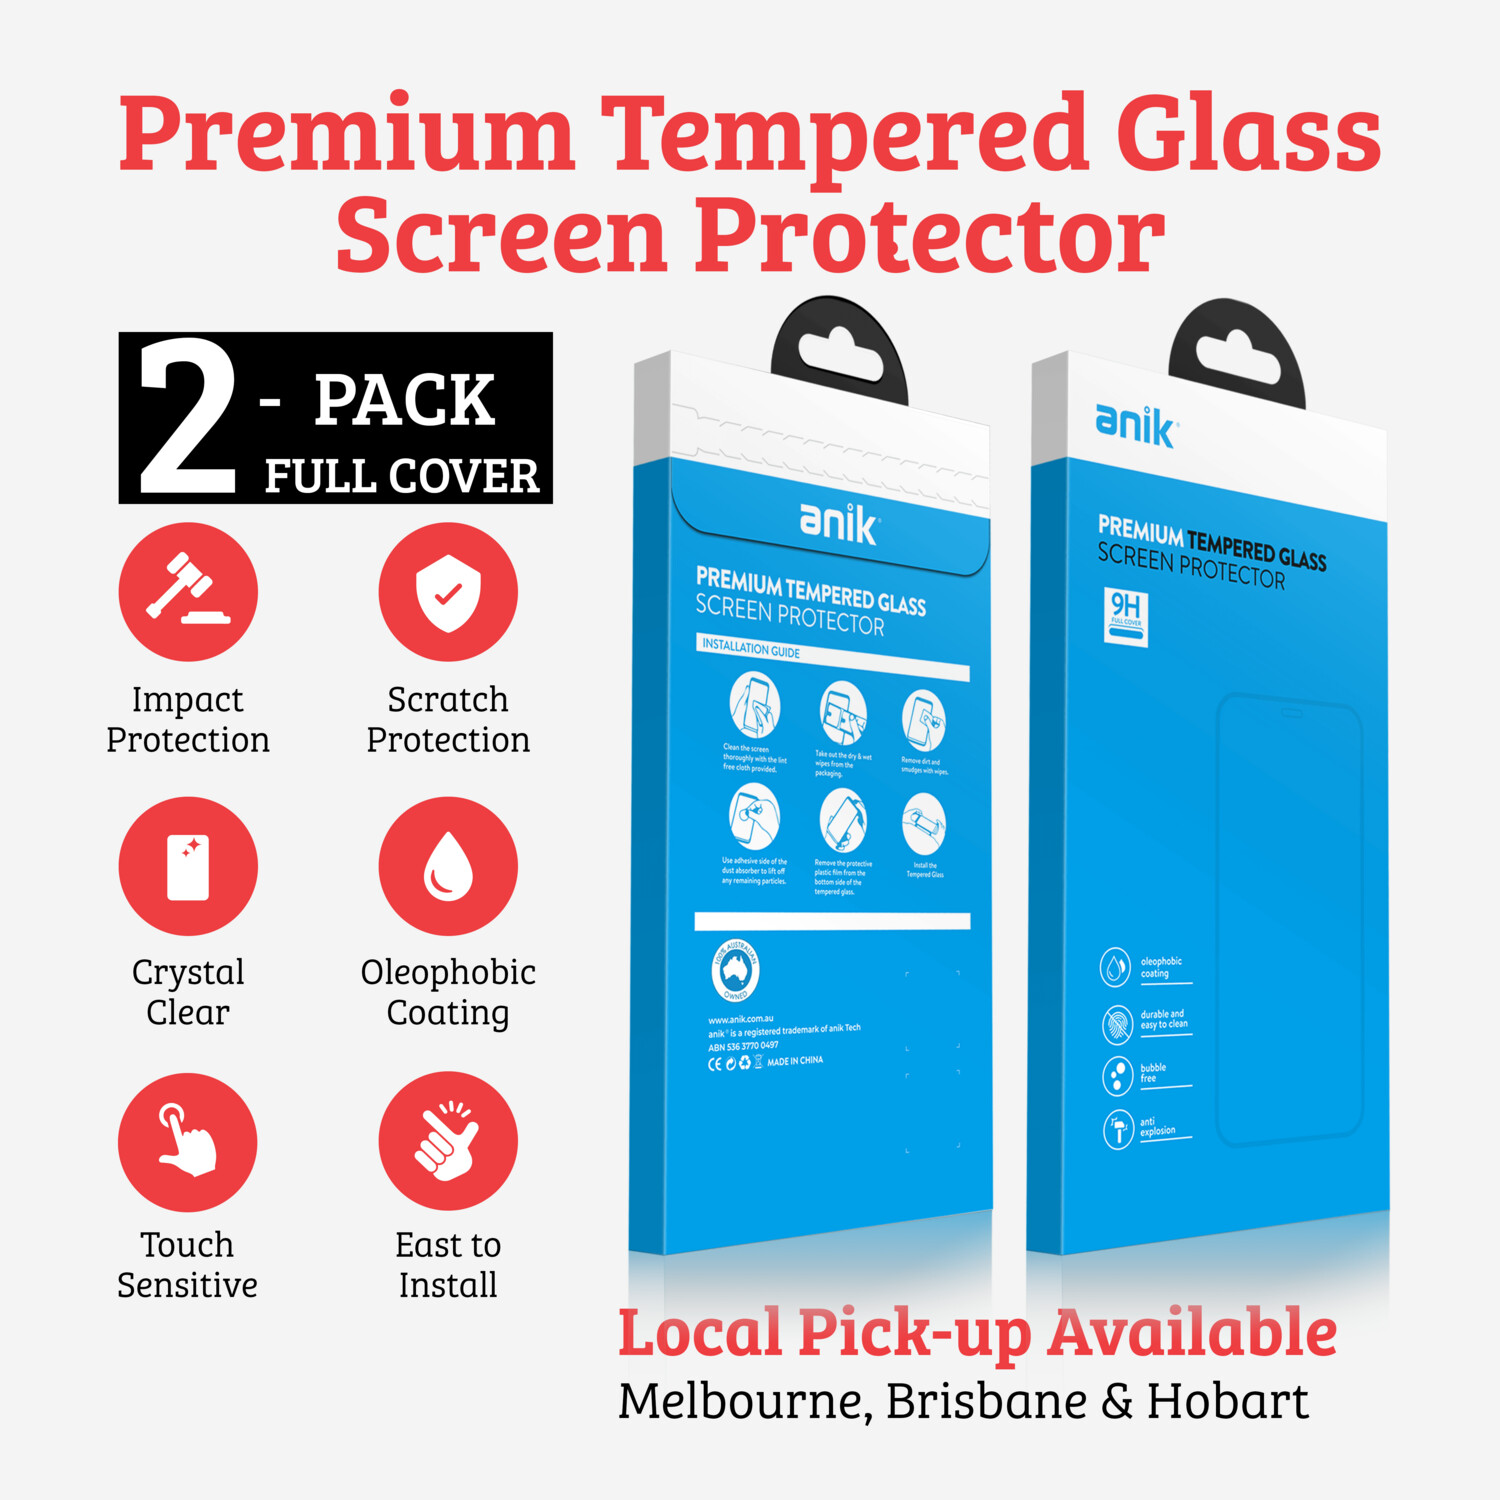 ANIK Premium Full Cover Tempered Glass Screen Protector for iPhone 12 [2 Pack]